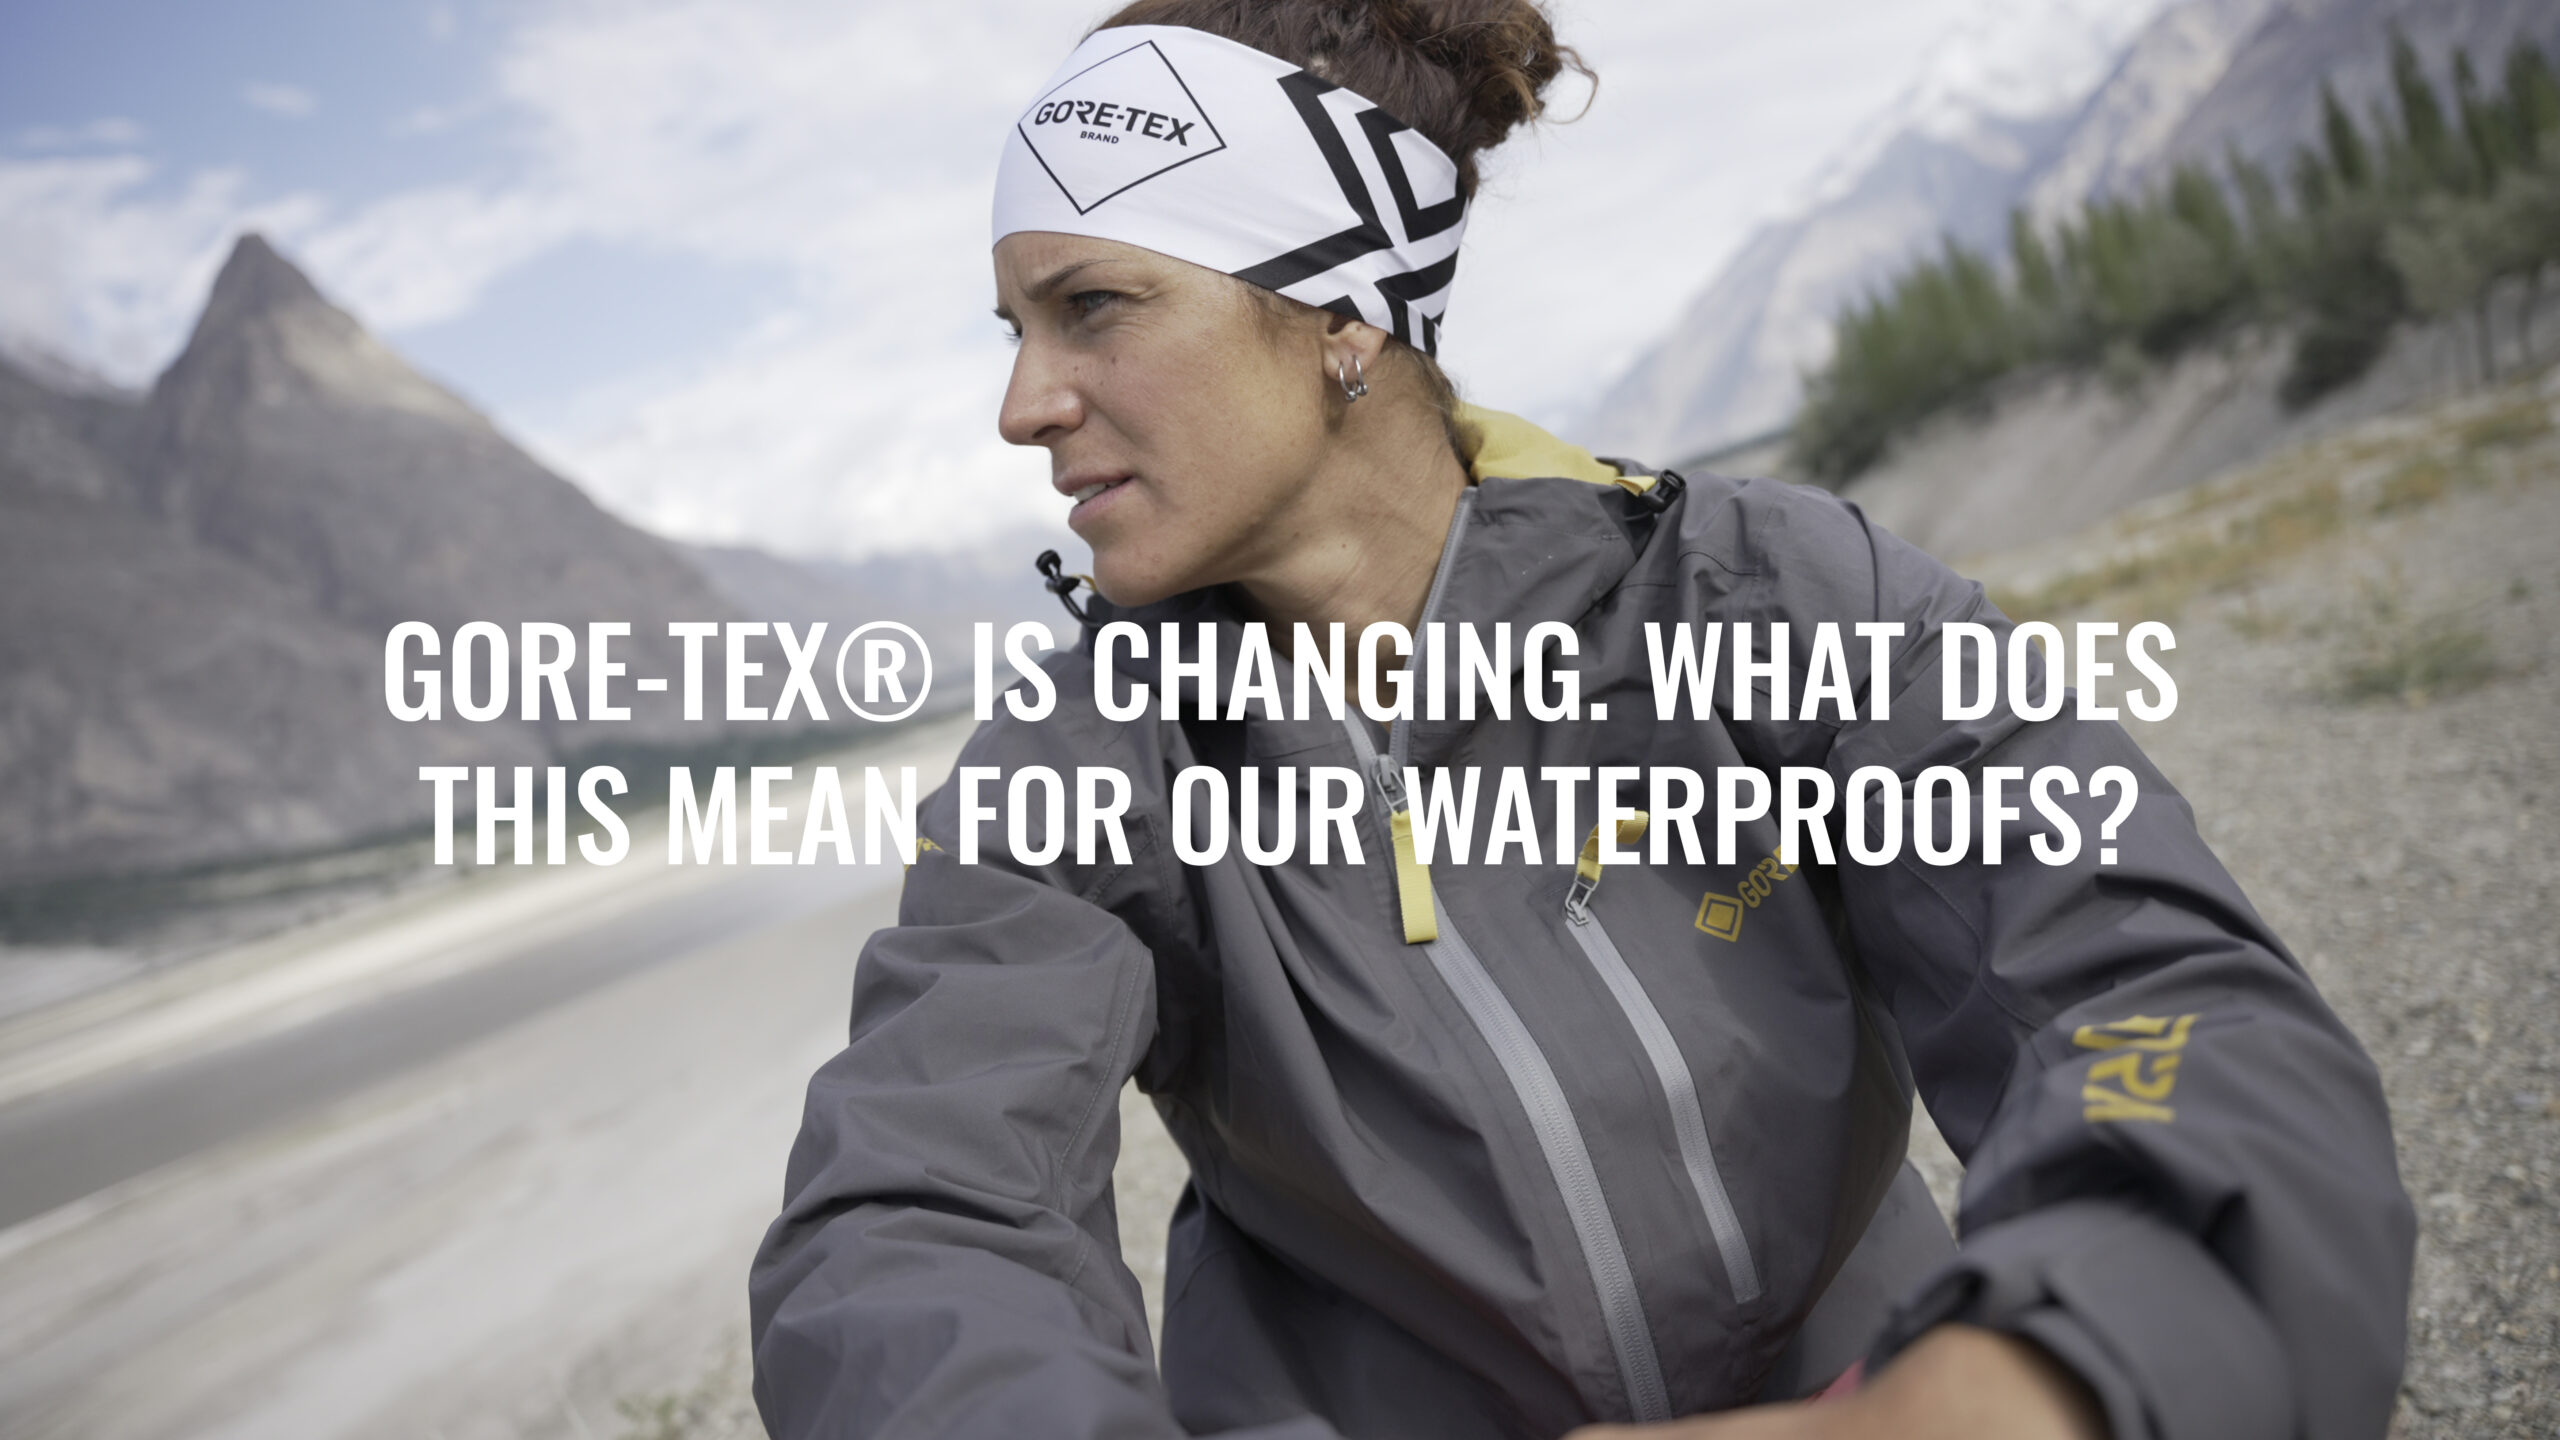 Gore-Tex® Is Changing. What Does This Mean For Our Waterproofs?